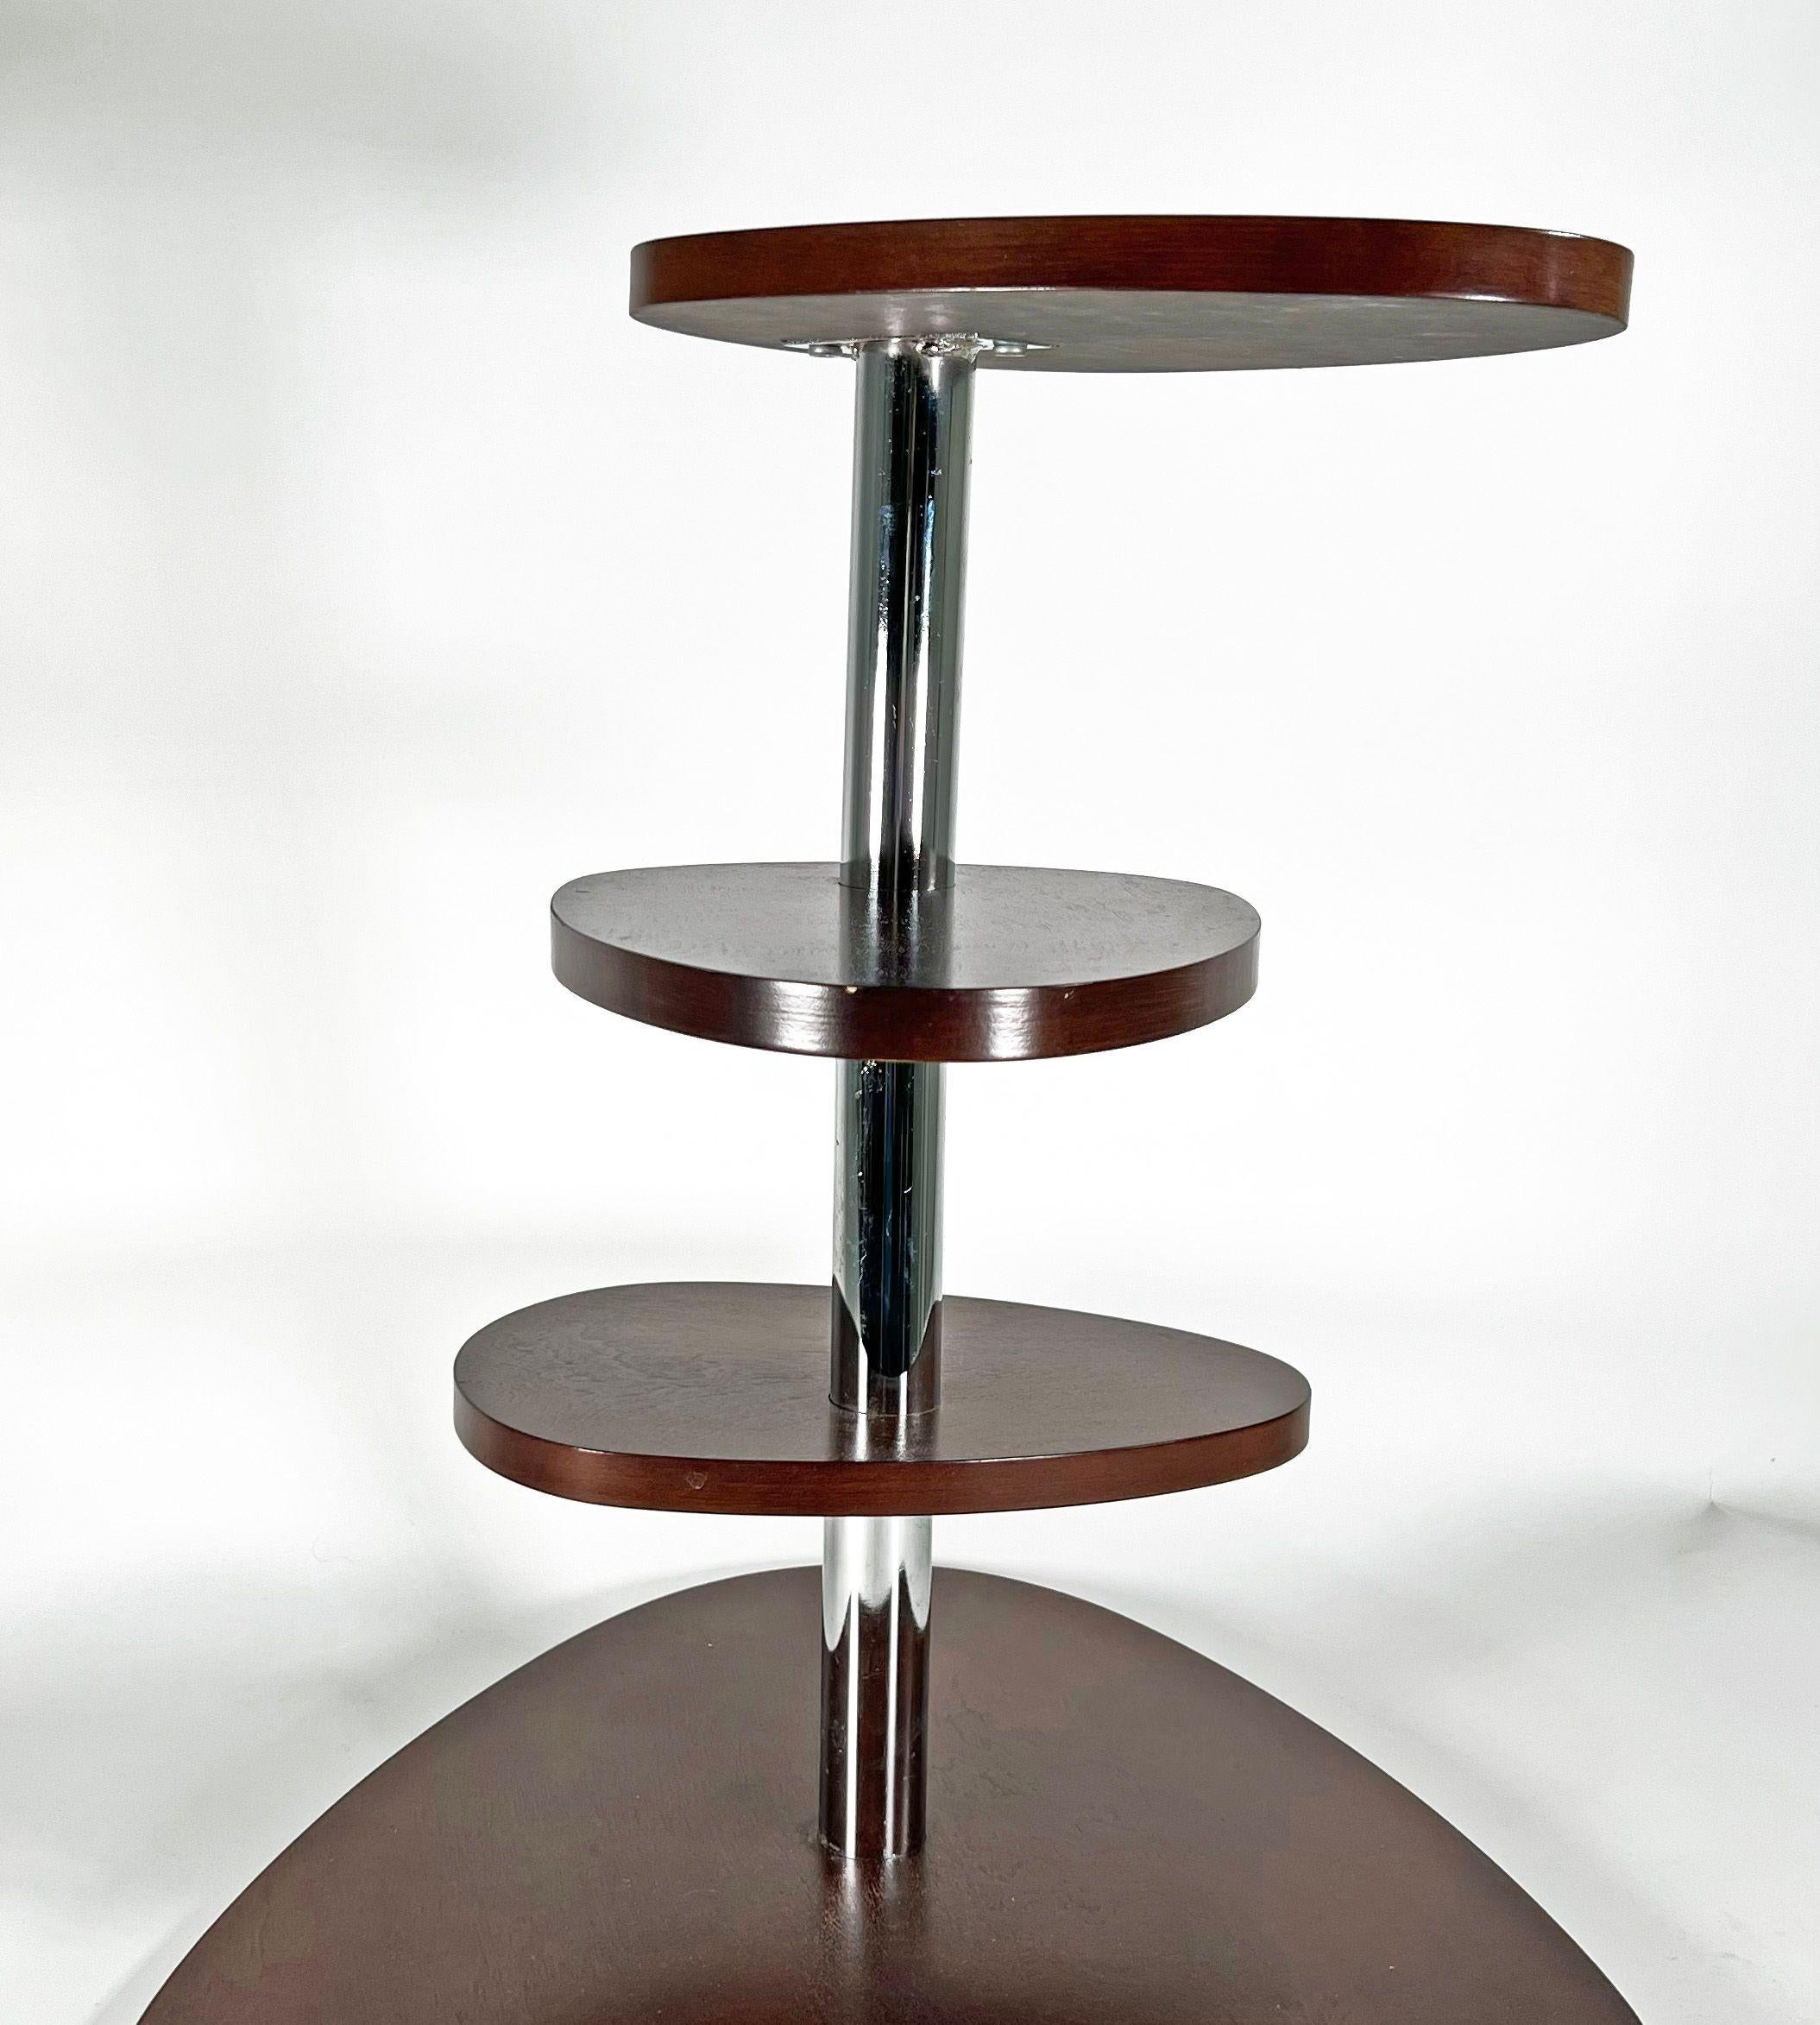 French Modern Mahogany 4 Tier Pivoting Mexique Table, Style Charlotte Perriand In Good Condition For Sale In Hollywood, FL